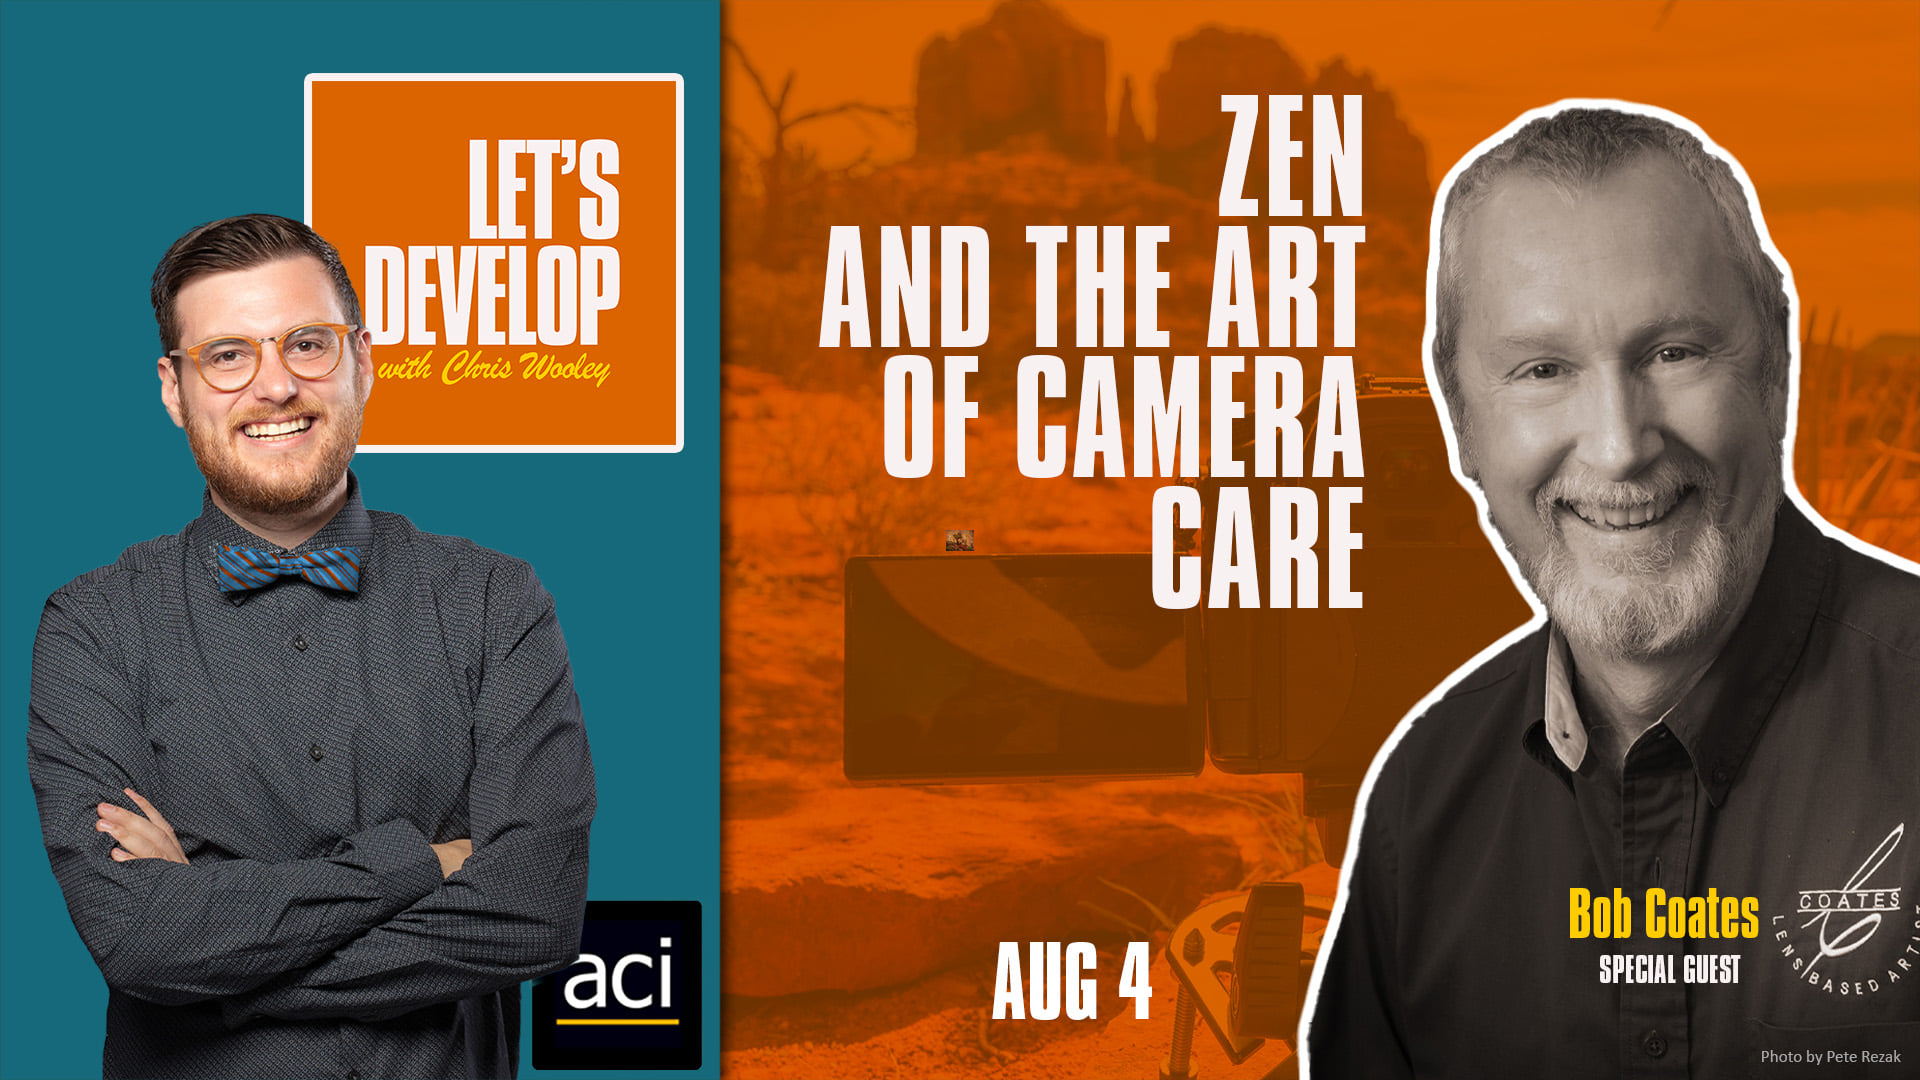 Zen and the art of camera care – Lets Develop Webinar